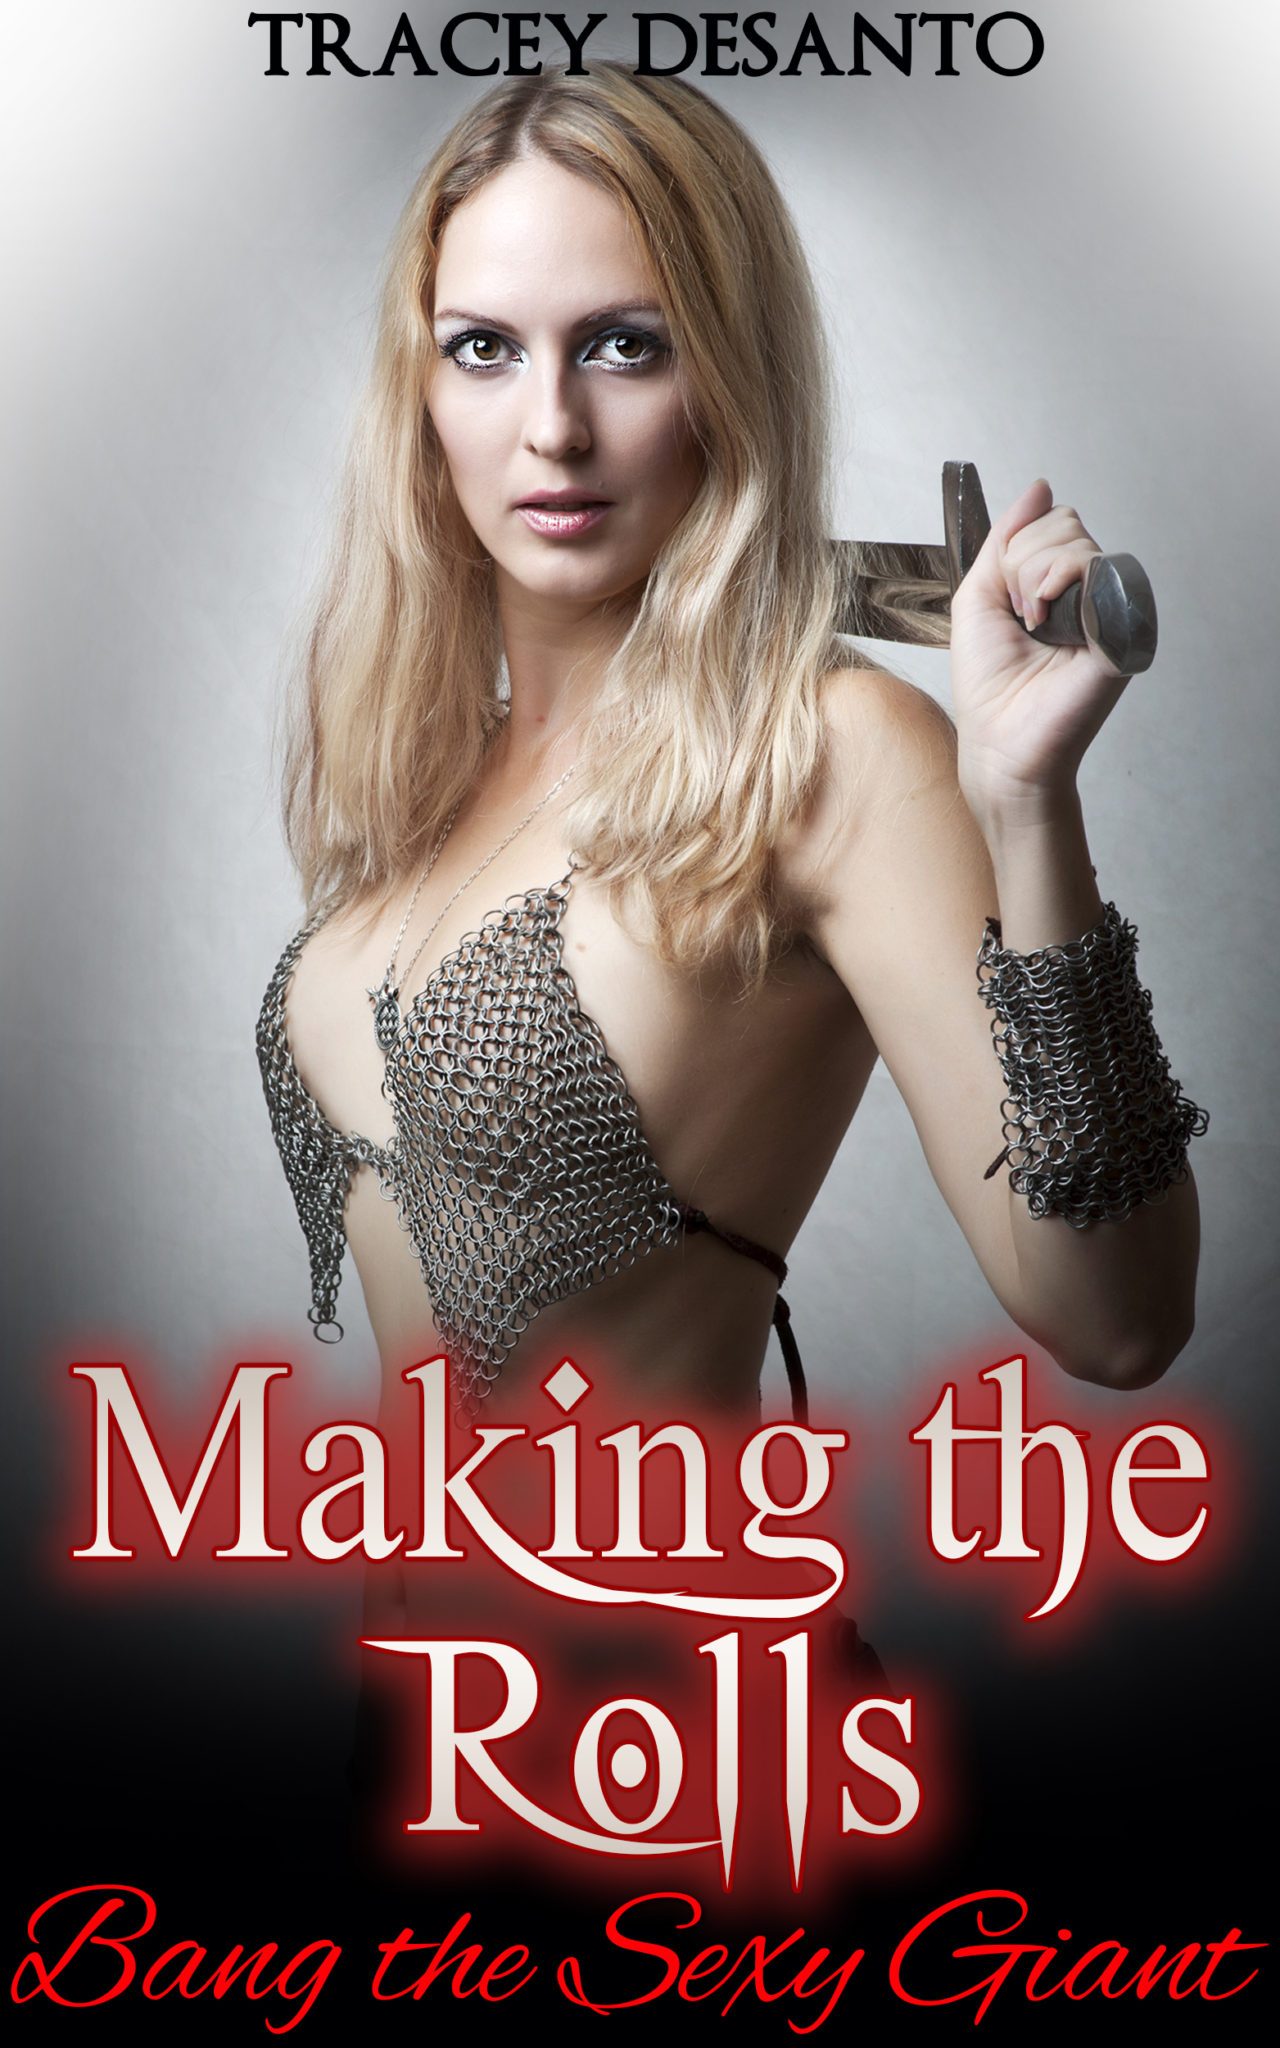 FREE: Making the Rolls: Love That Giant by Tracey DeSanto